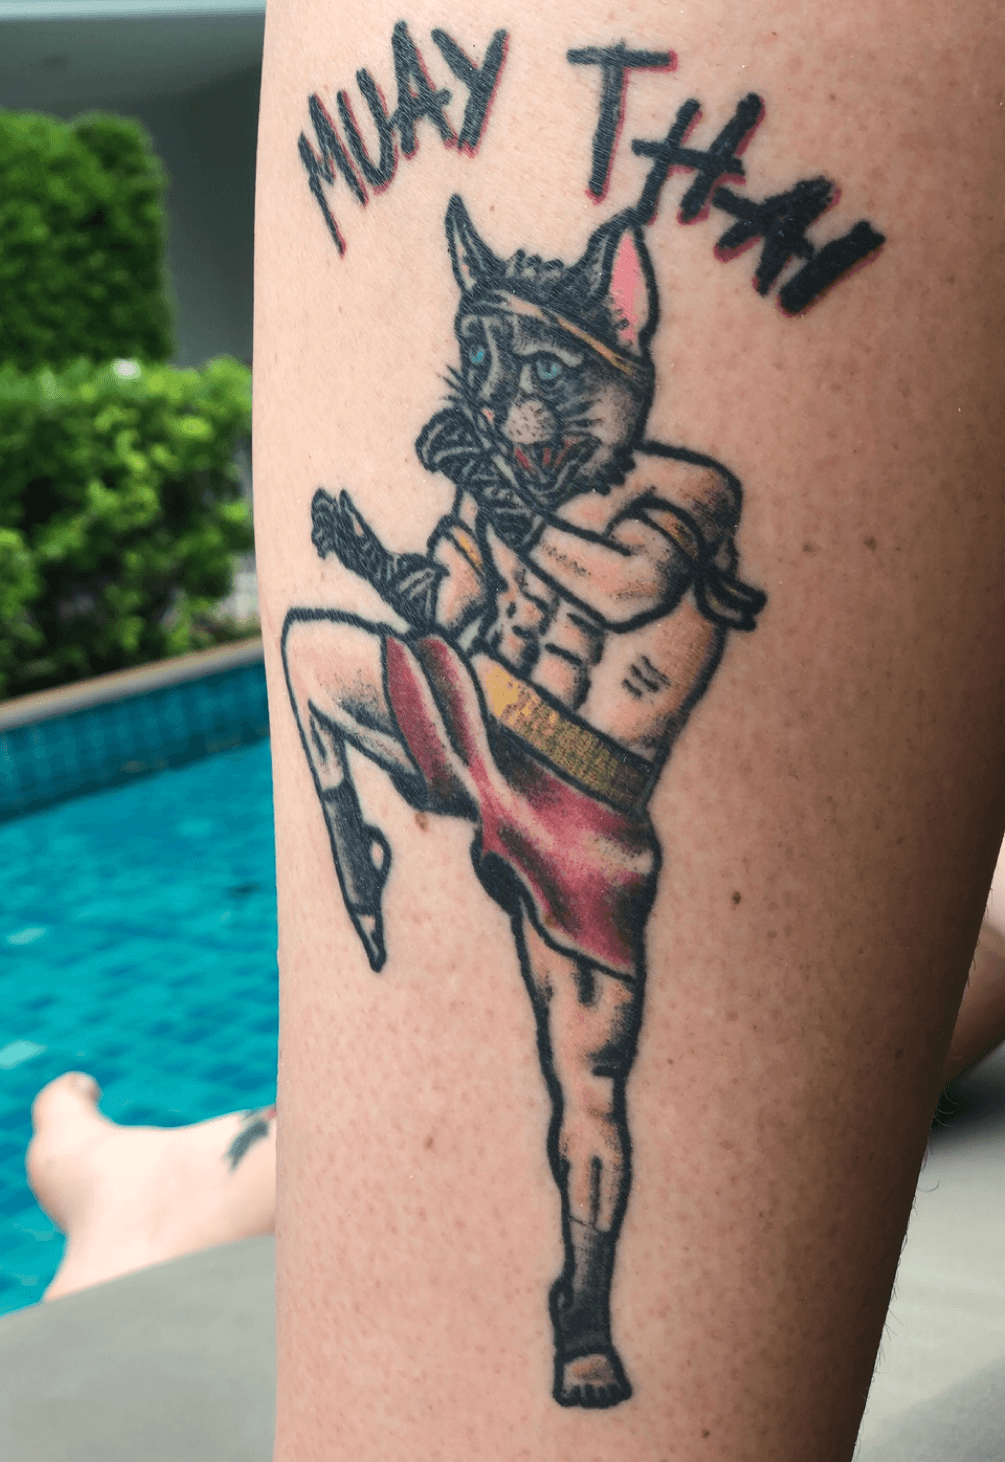 Authentic Muay Thai Tattoos Designs and Meanings